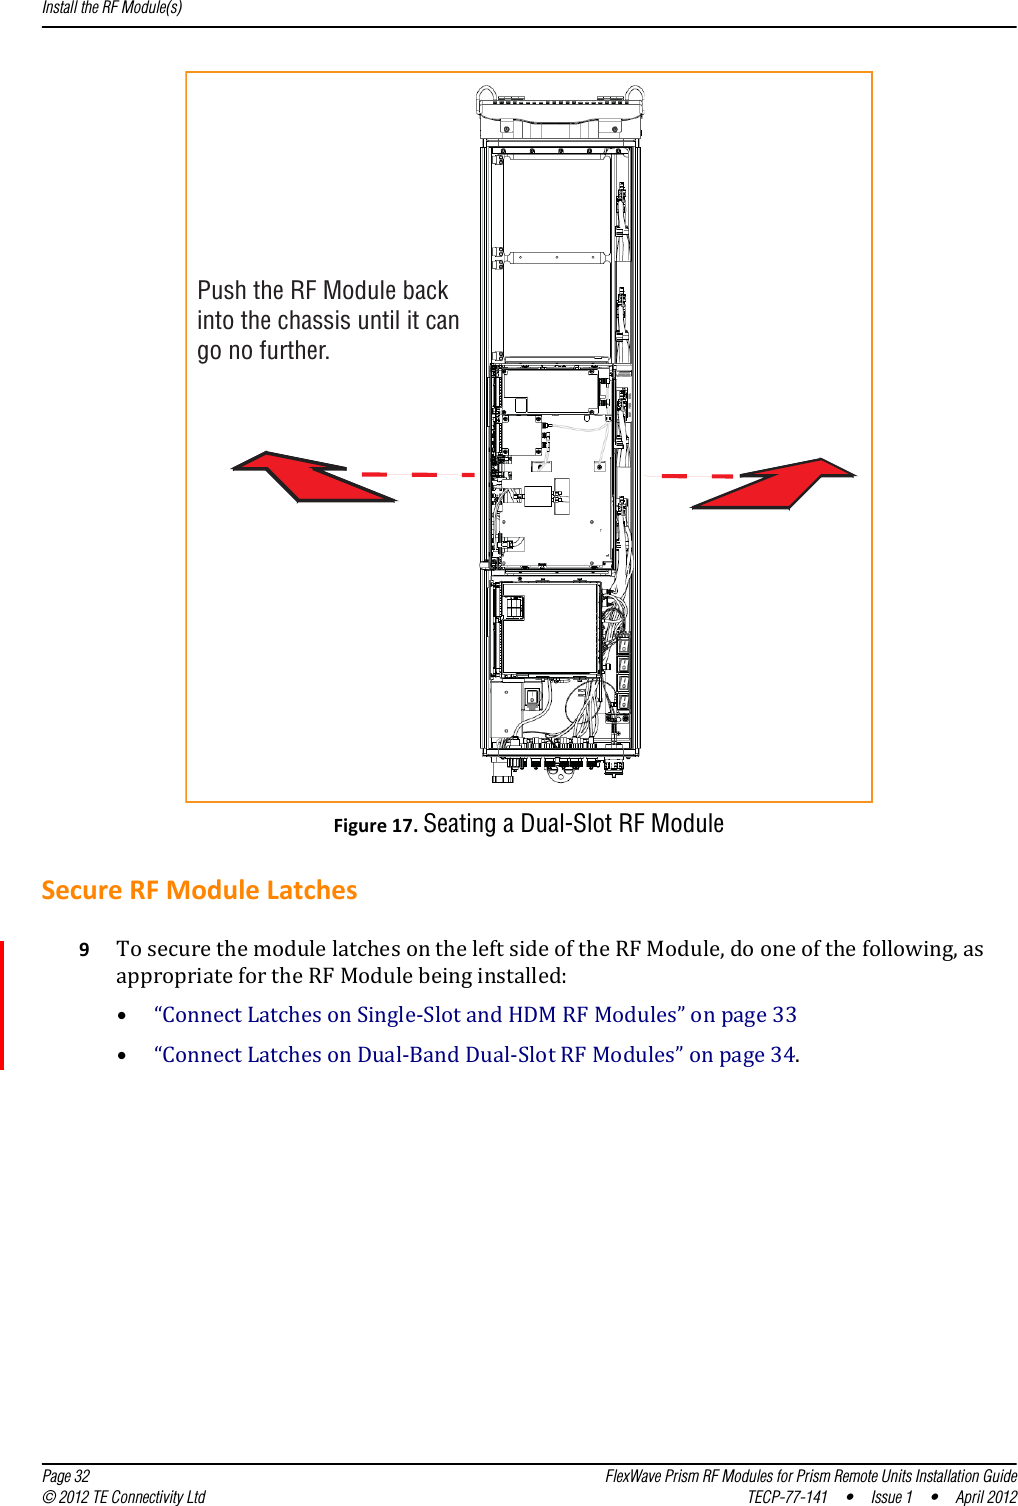 Push the RF Module backinto the chassis until it cango no further.Install the RF Module(s)  Page 32 FlexWave Prism RF Modules for Prism Remote Units Installation Guide© 2012 TE Connectivity Ltd TECP-77-141 • Issue 1 • April 2012Figure17.Seating a Dual-Slot RF ModuleSecureRFModuleLatches9TosecurethemodulelatchesontheleftsideoftheRFModule,dooneofthefollowing,asappropriatefortheRFModulebeinginstalled:•“ConnectLatchesonSingle‐SlotandHDMRFModules”onpage33•“ConnectLatchesonDual‐BandDual‐SlotRFModules”onpage34.